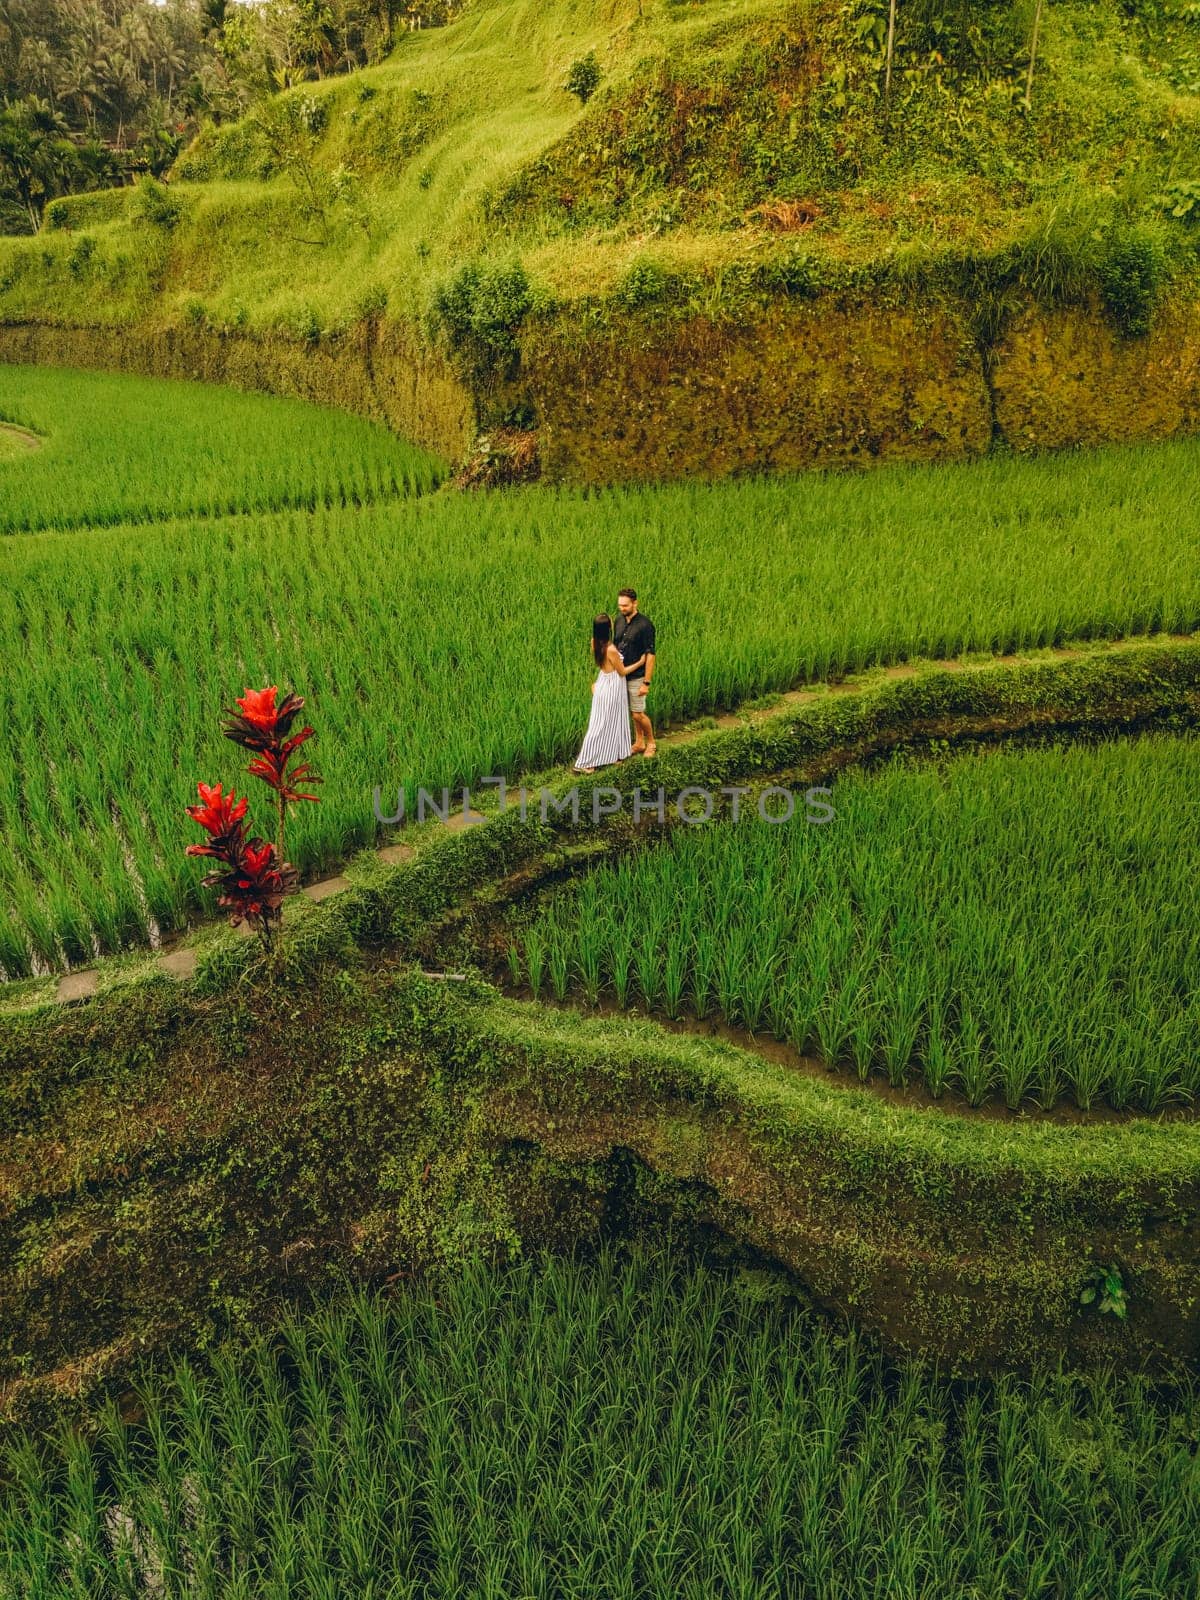 A couple stands in a green field with tall grass, aerial view of Tegallalang Bali rice terraces on Bali, Indonesia.